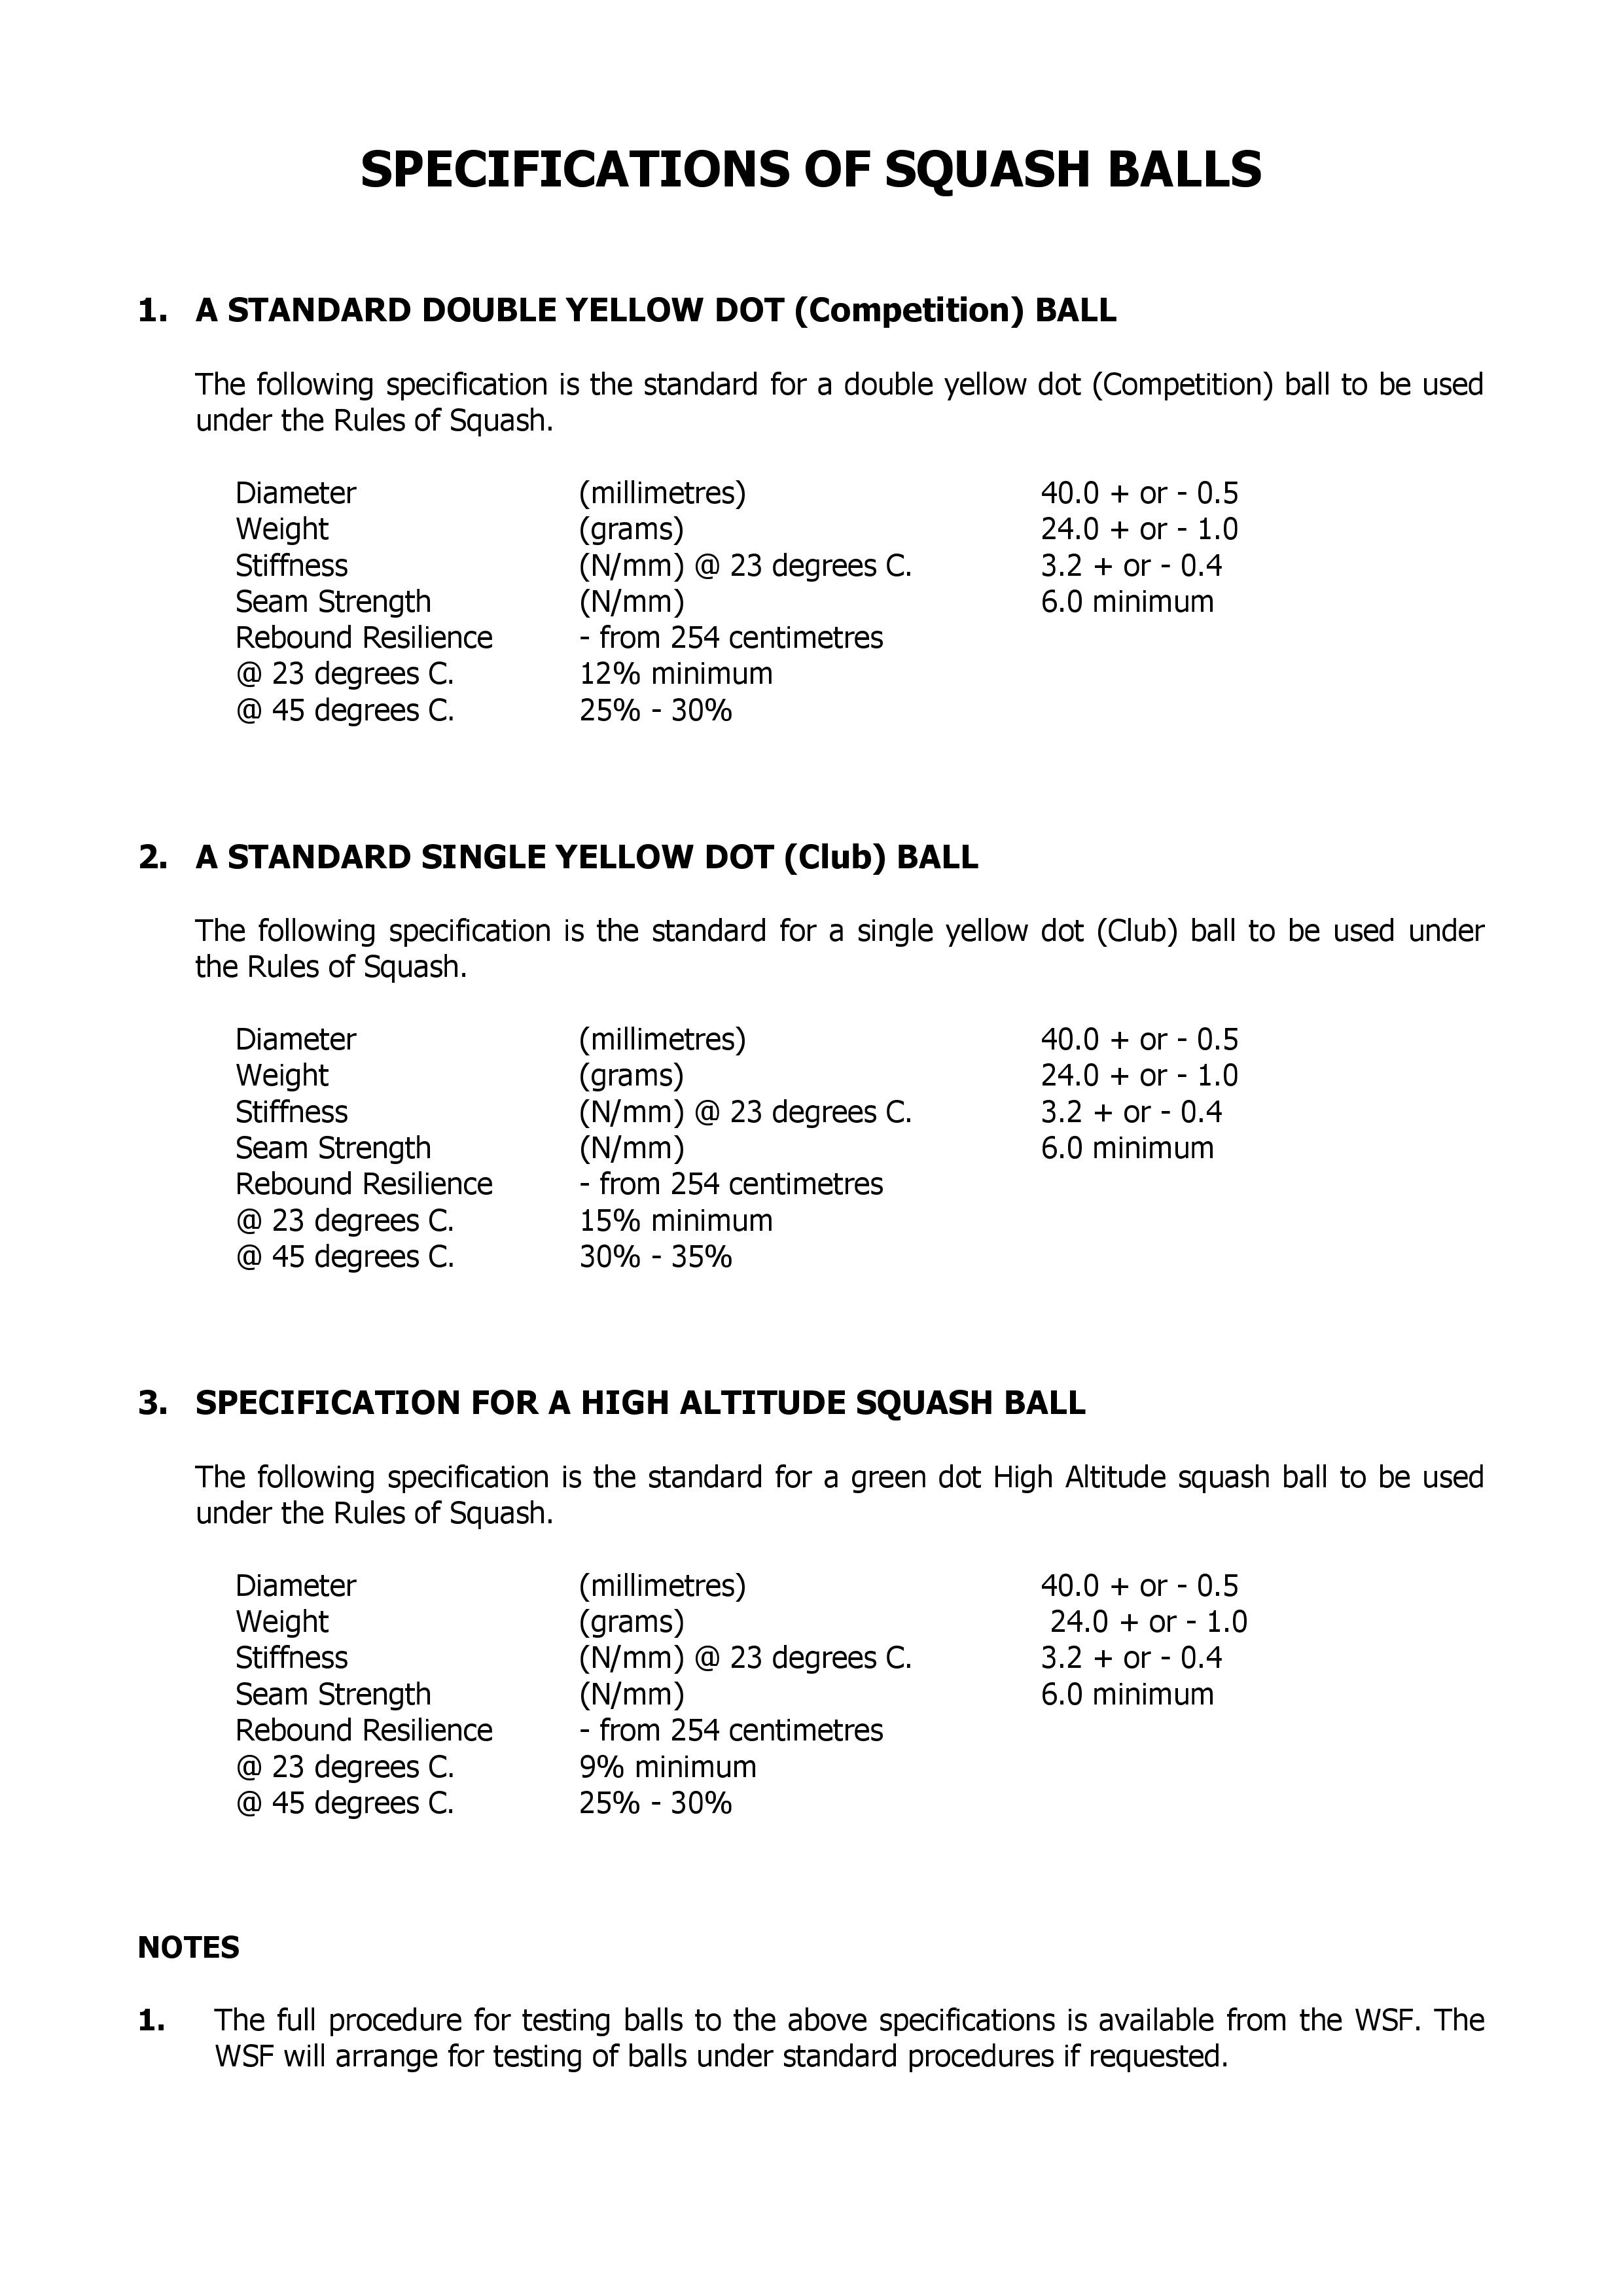 World Squash Federation Ball Specification Rules - Global Squash Coach - Page 2.jpg